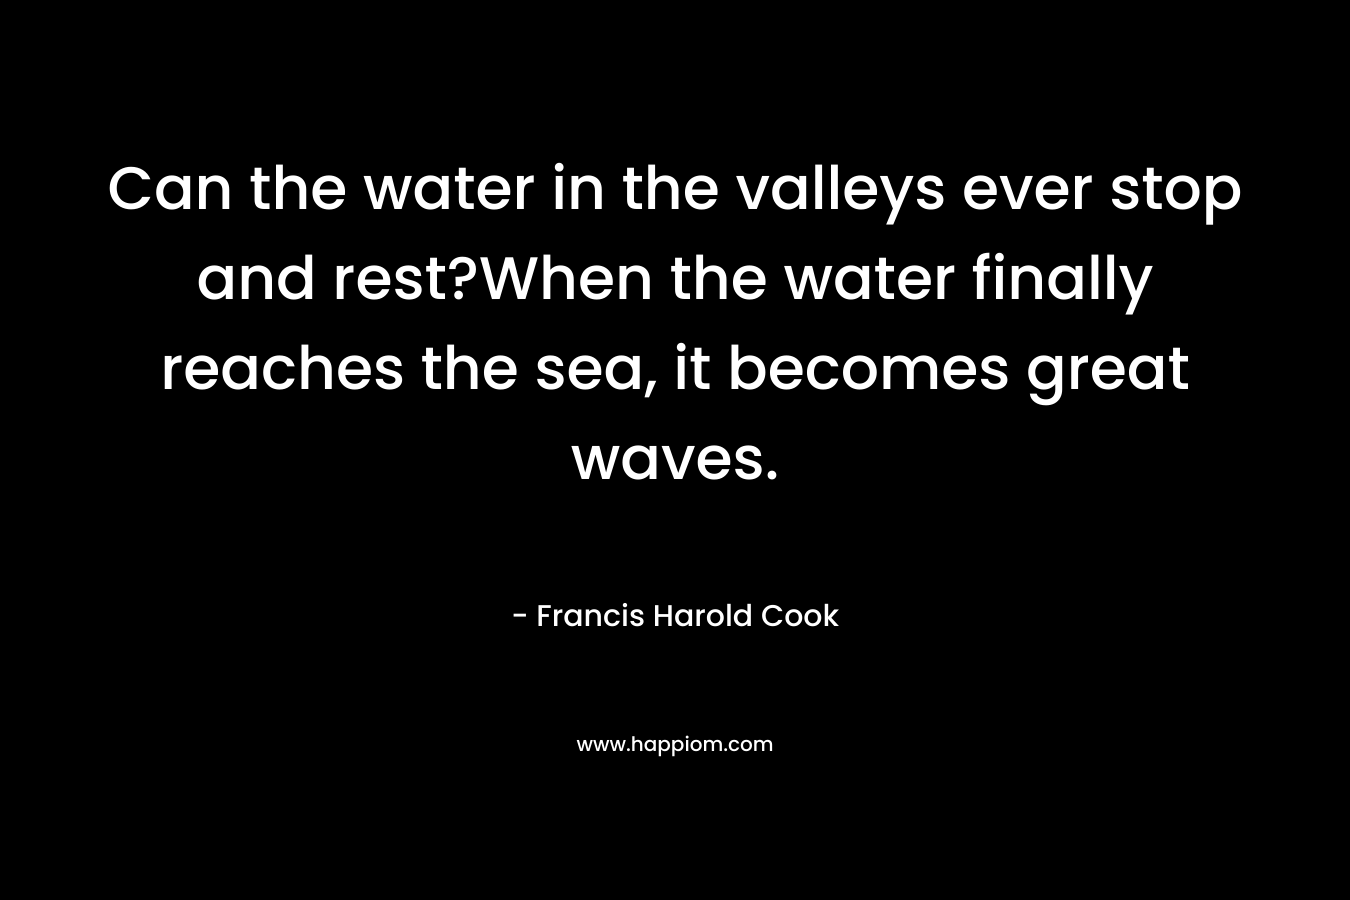 Can the water in the valleys ever stop and rest?When the water finally reaches the sea, it becomes great waves.